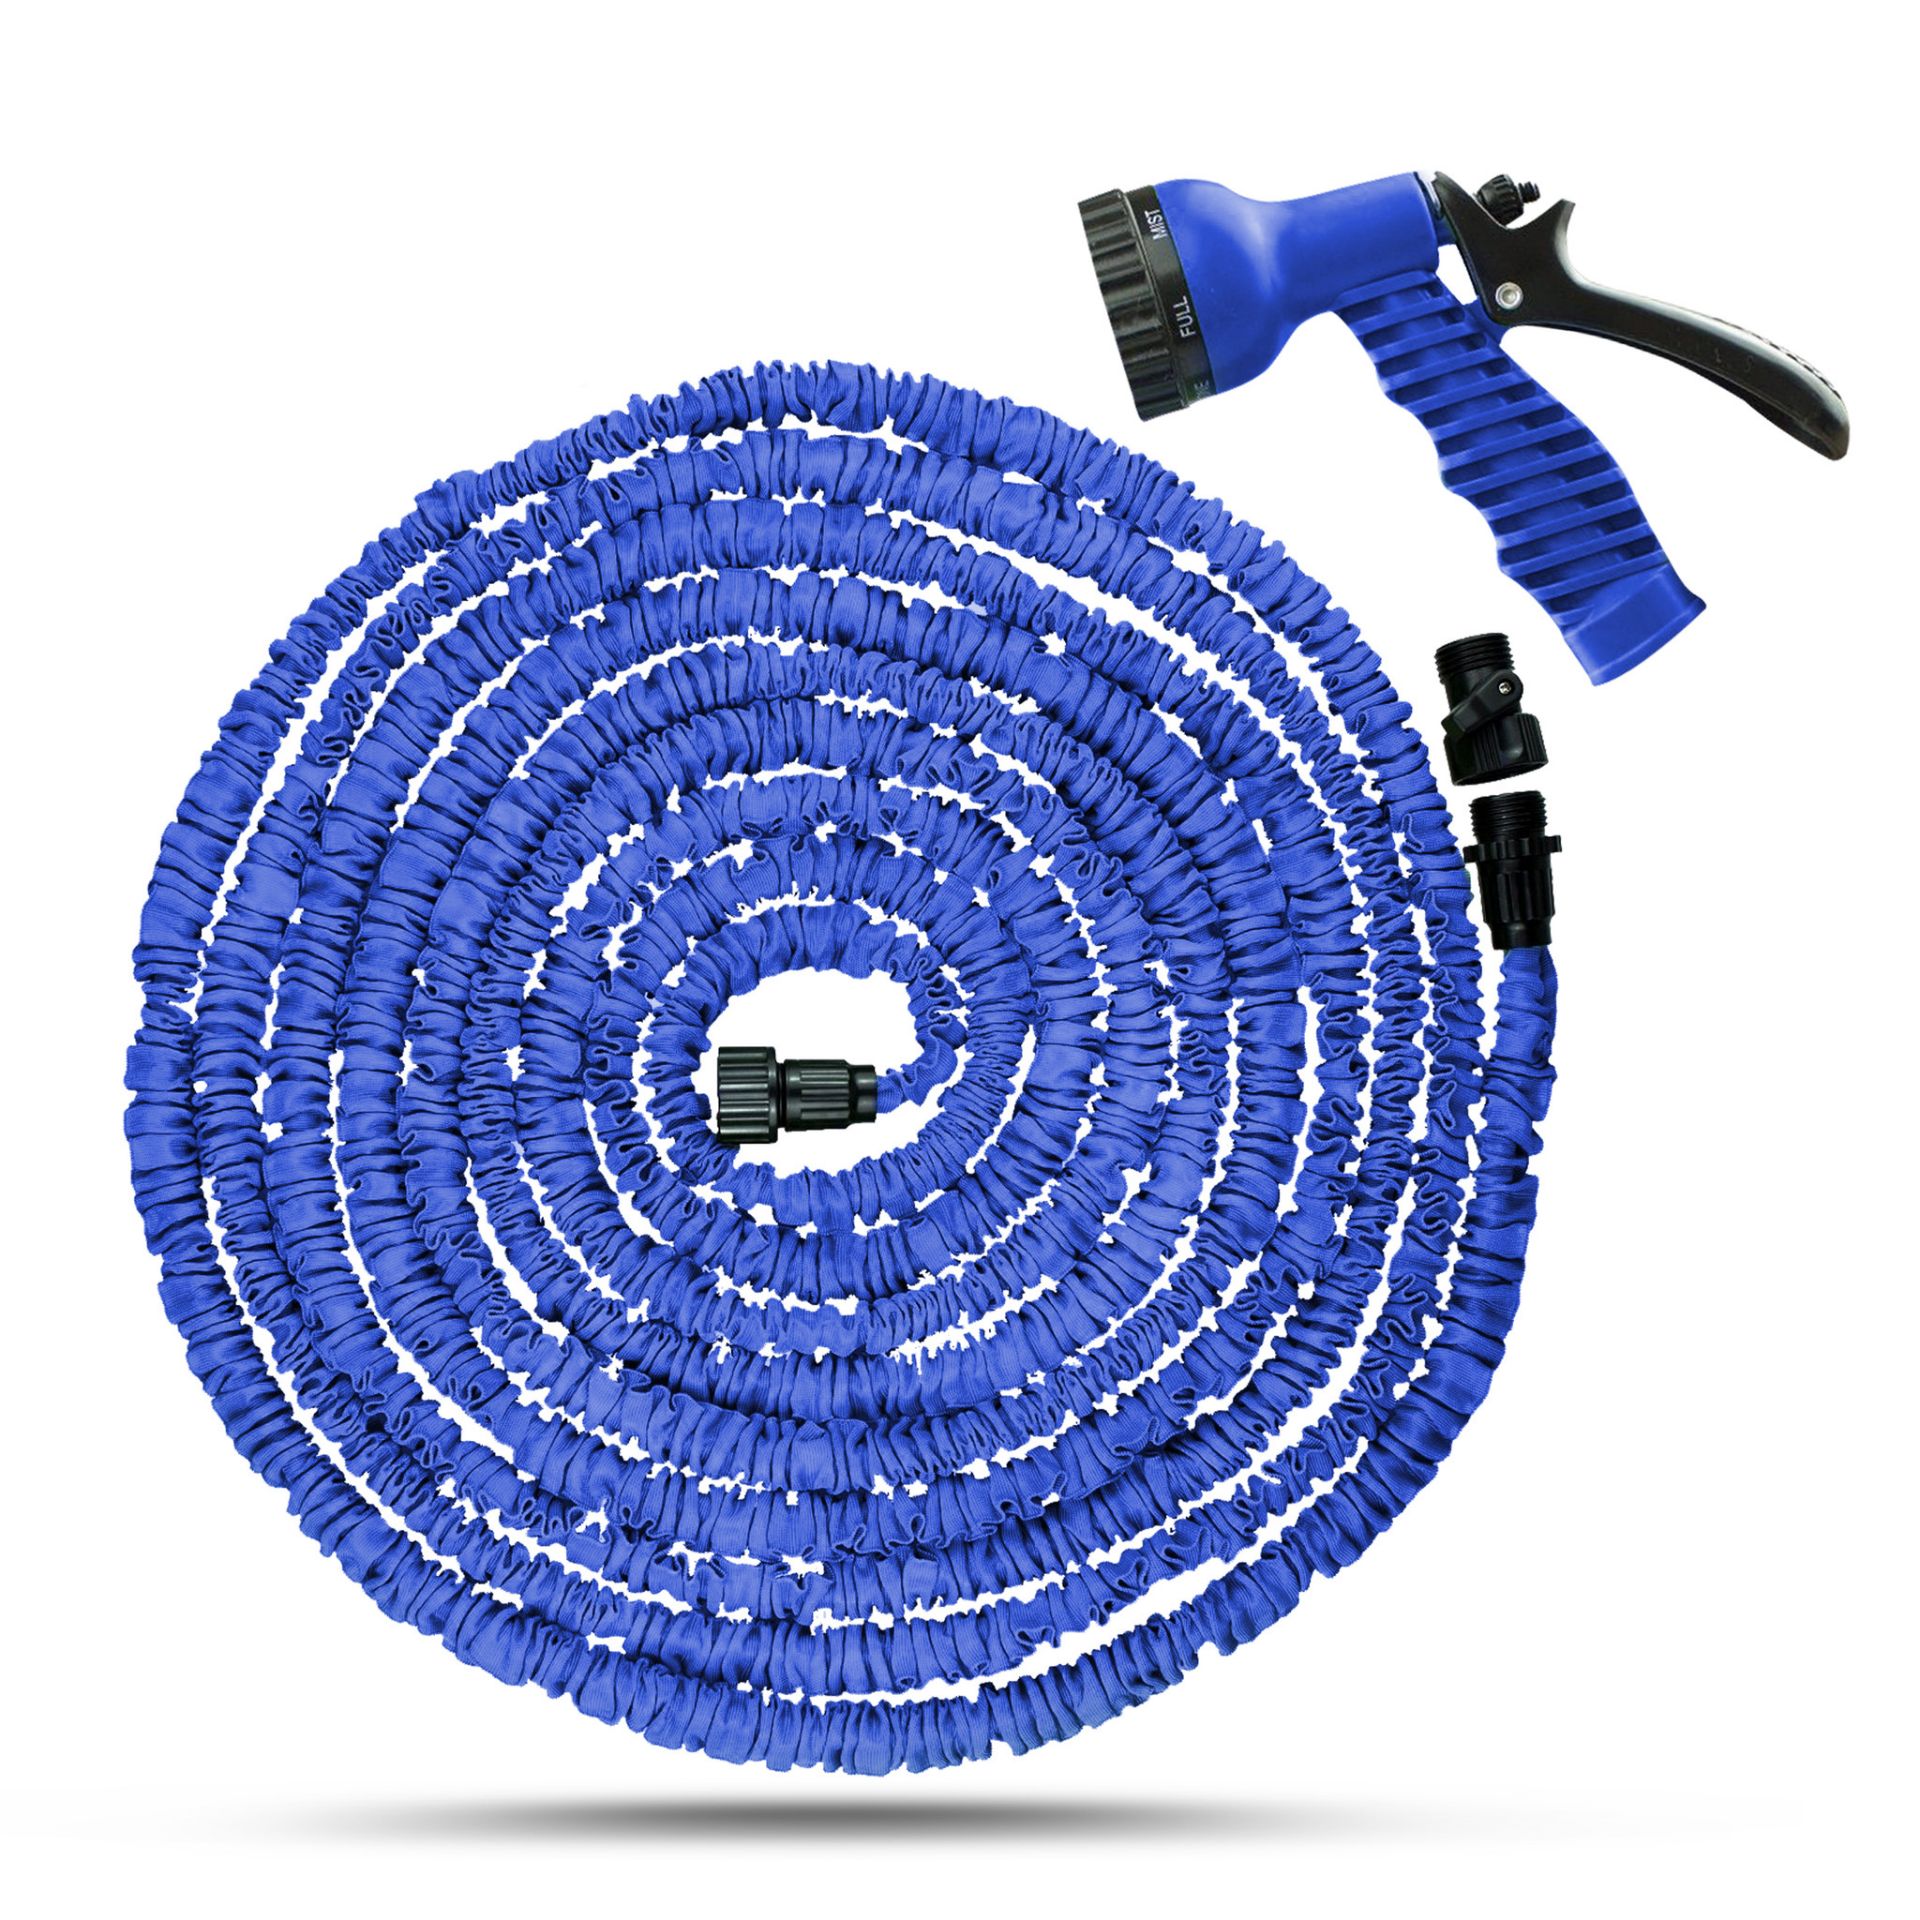 V Brand New 25 Foot Expandable Hose - Automatically Expands - Lightweight - Easily Stored X 2 YOUR